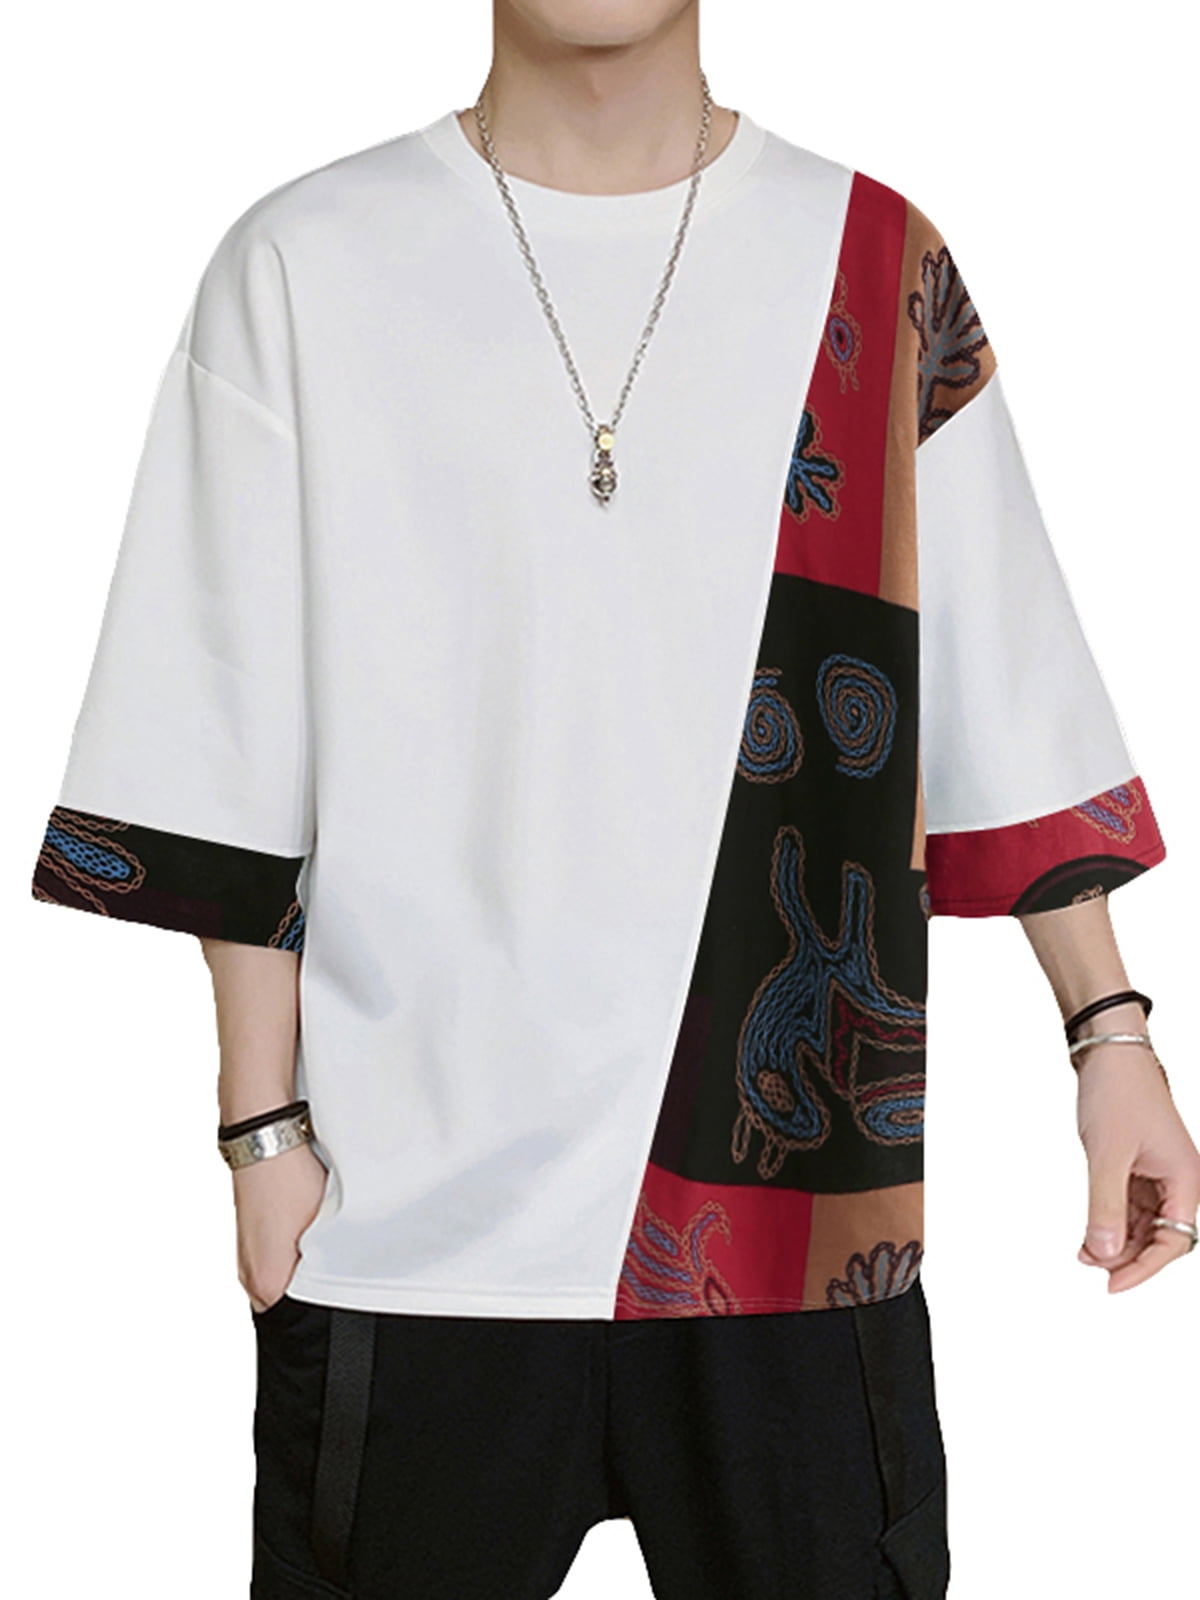 INCERUN Mens Chinese Style Ethnic Printed T Shirts Half Sleeve Casual  Cotton Stitching Tops